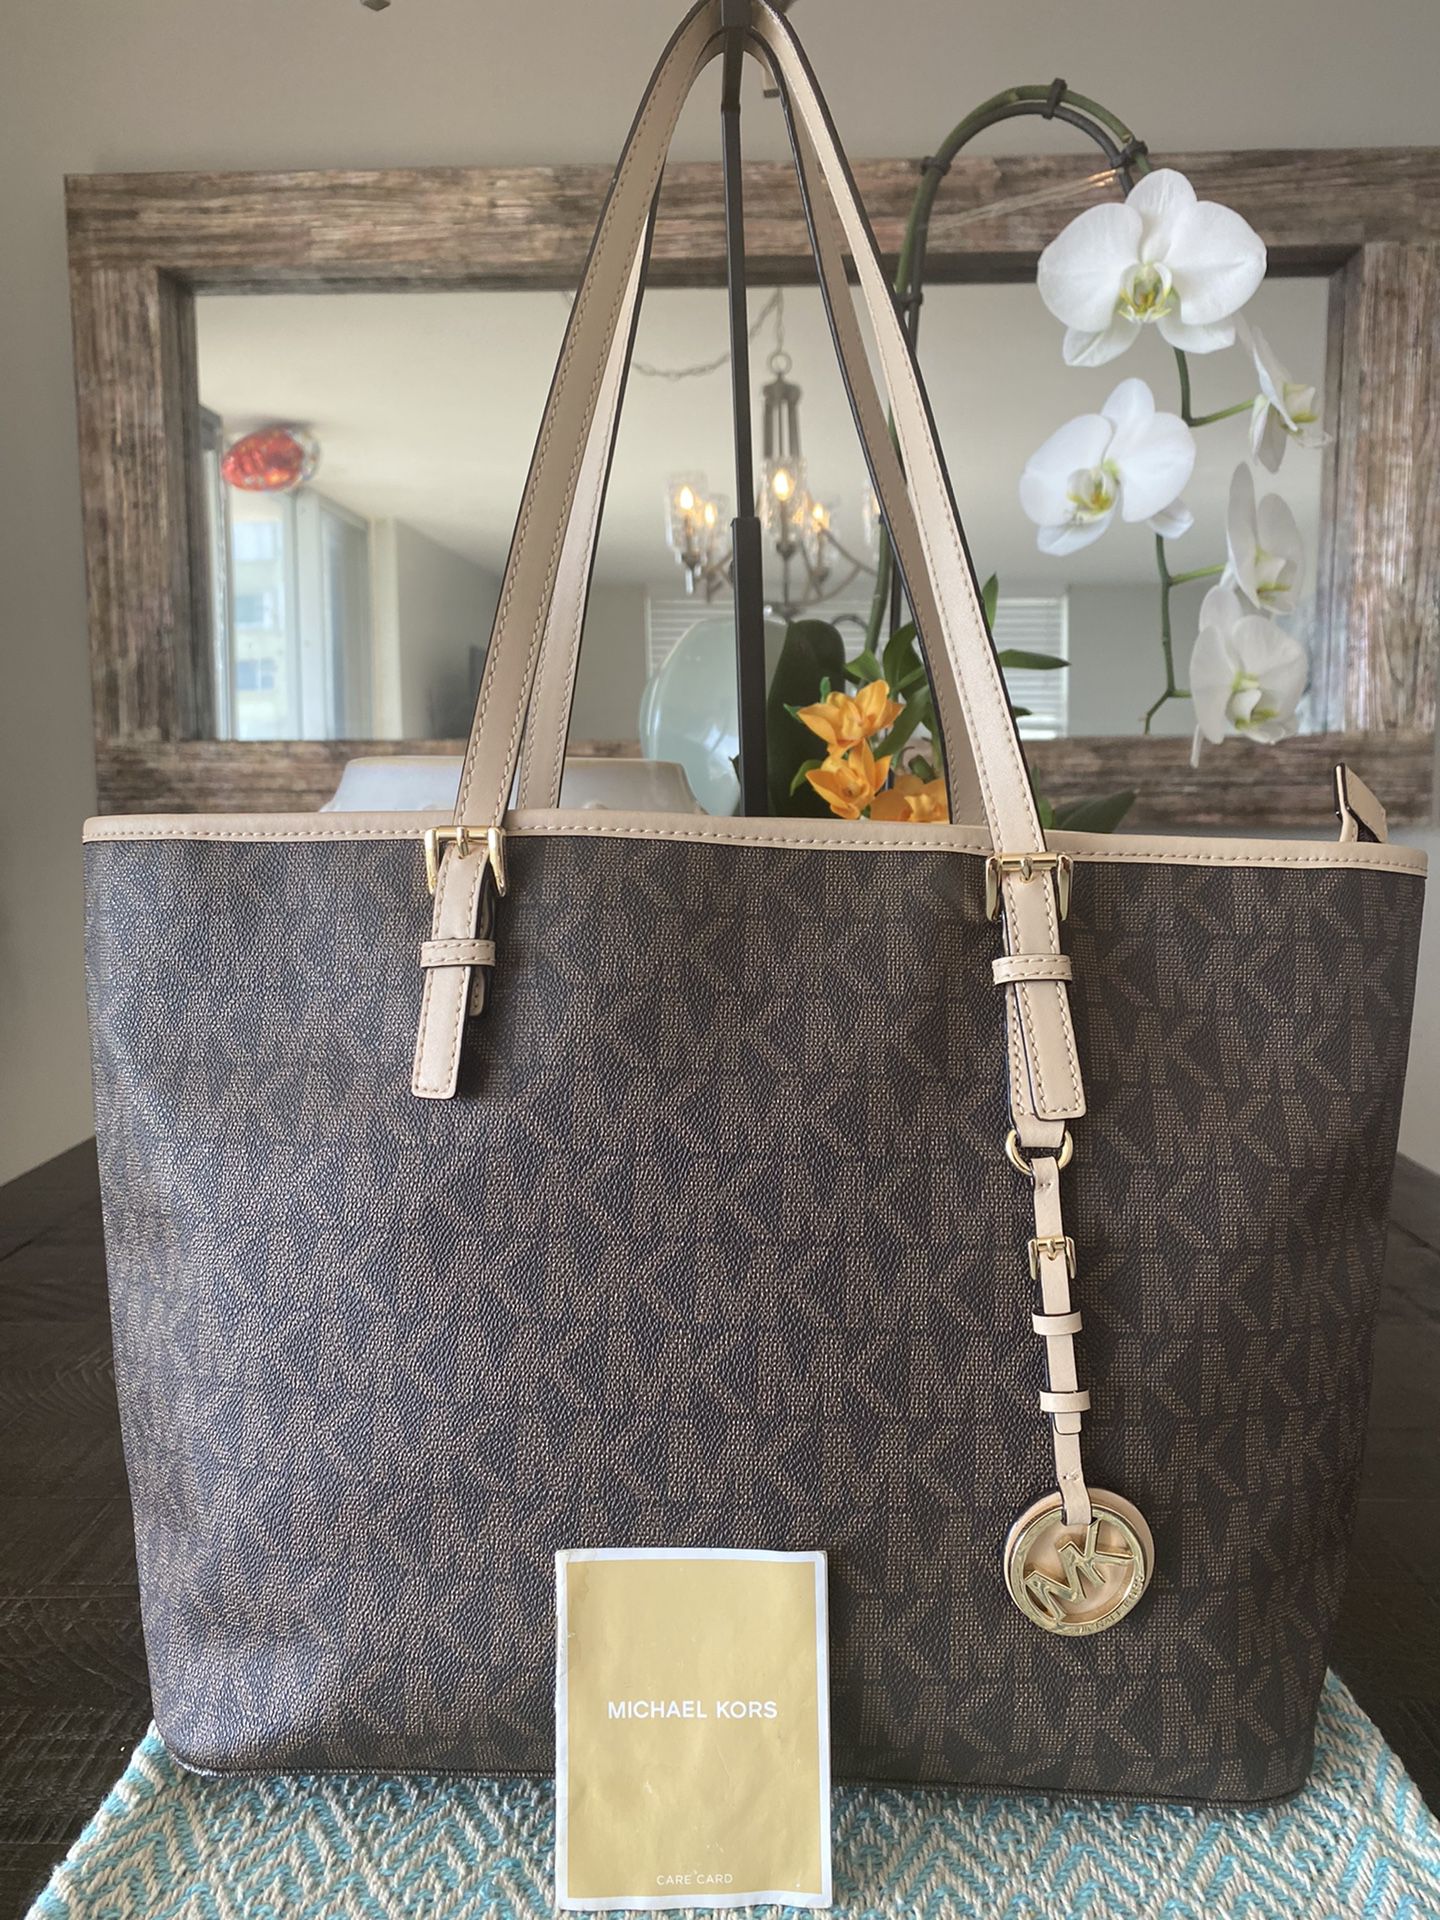 Michael Kors Signature Tote NWOT (Brown & Tan) w/Gold Hardware.⬇️Please Tap On Business Name Below For Additional Purse Listings⬇️